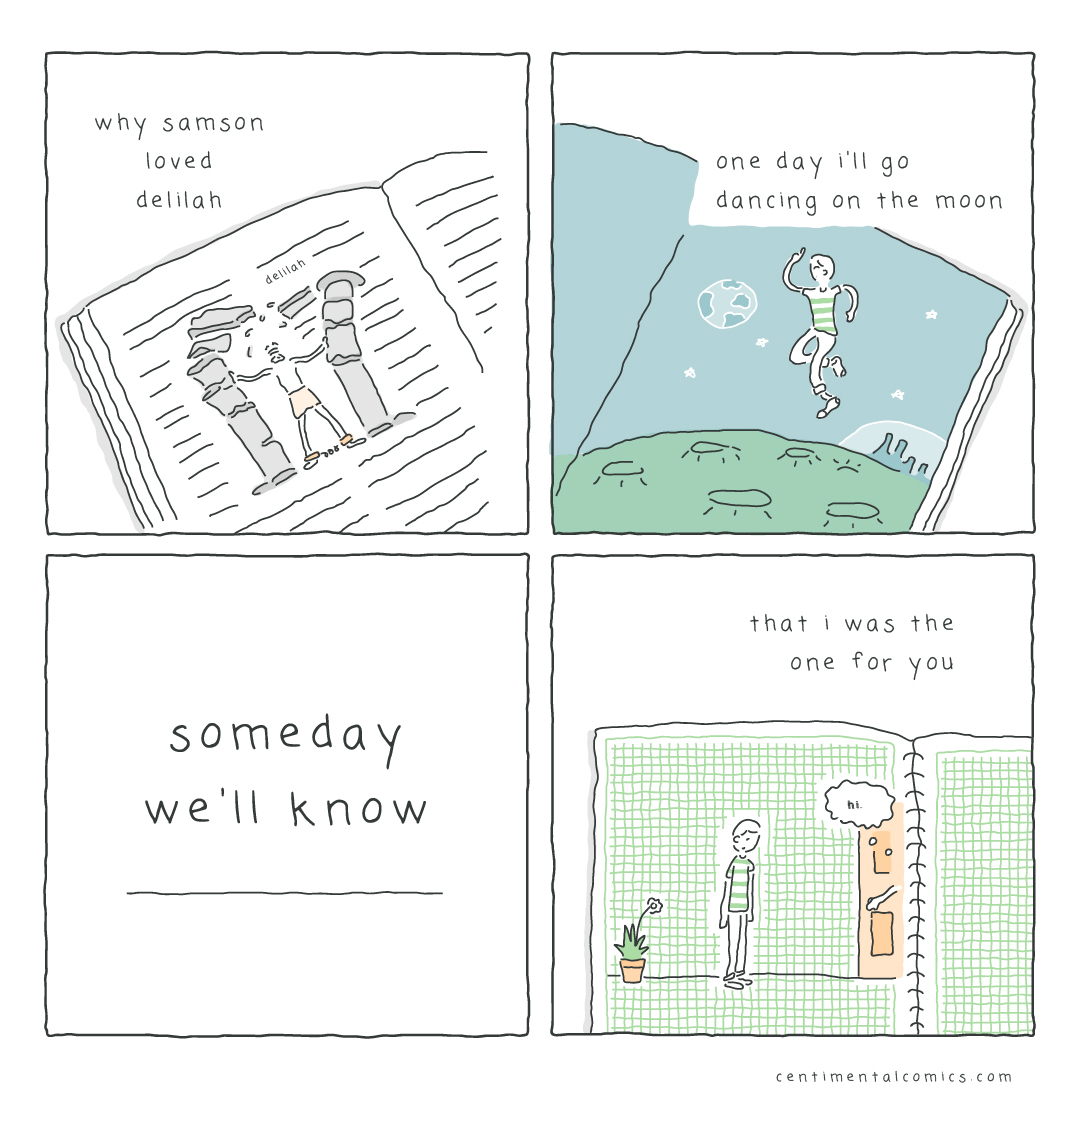 someday we'll know 2